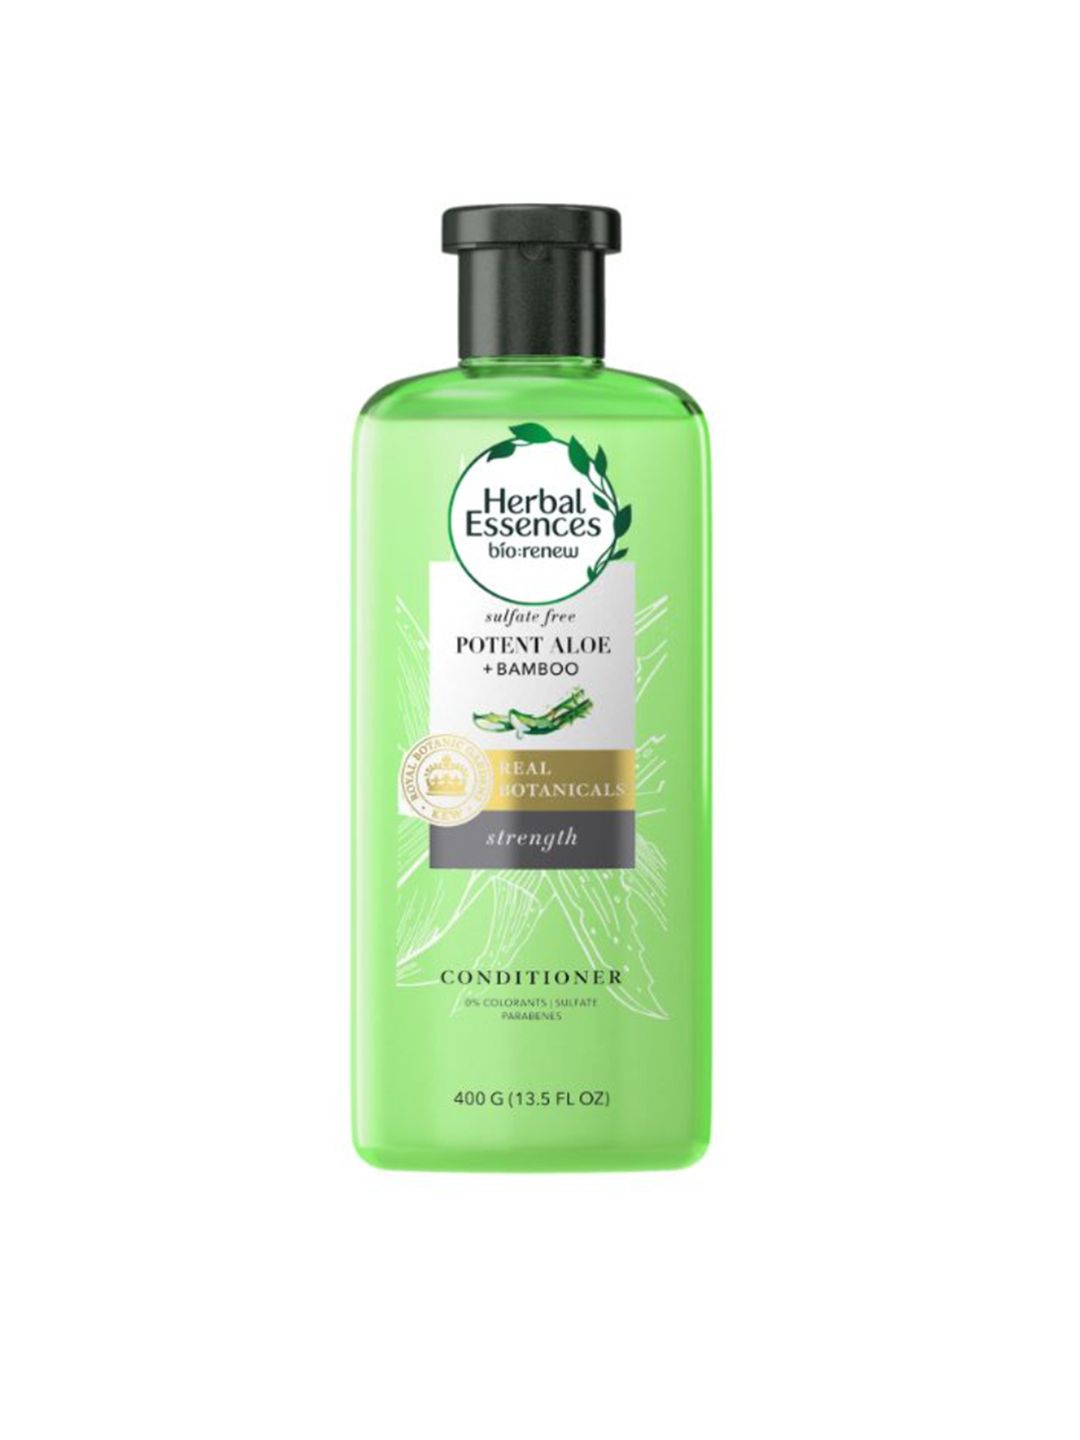 Herbal Essences Real Botanicals Potent Aloe & Bamboo Conditioner 400 ML Price in India